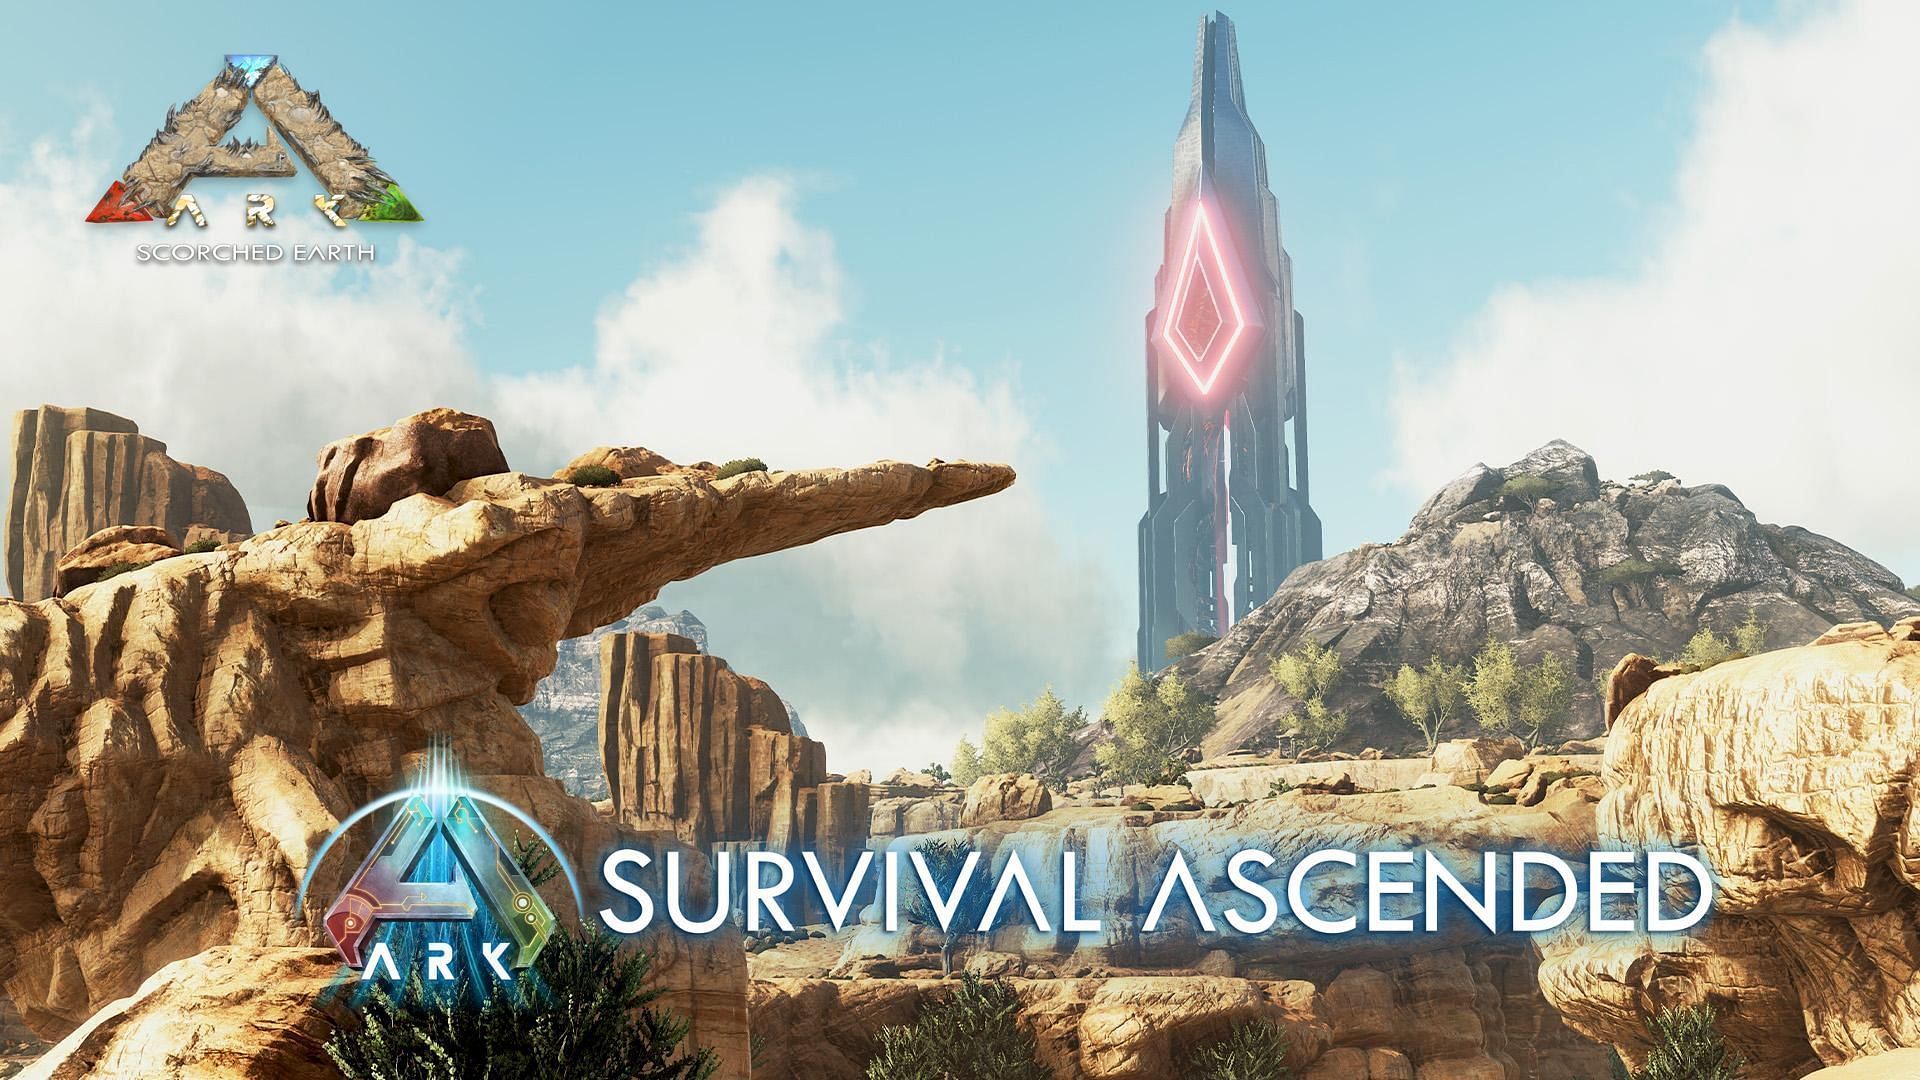 Ark Survival Ascedned scorched earth expansion release date